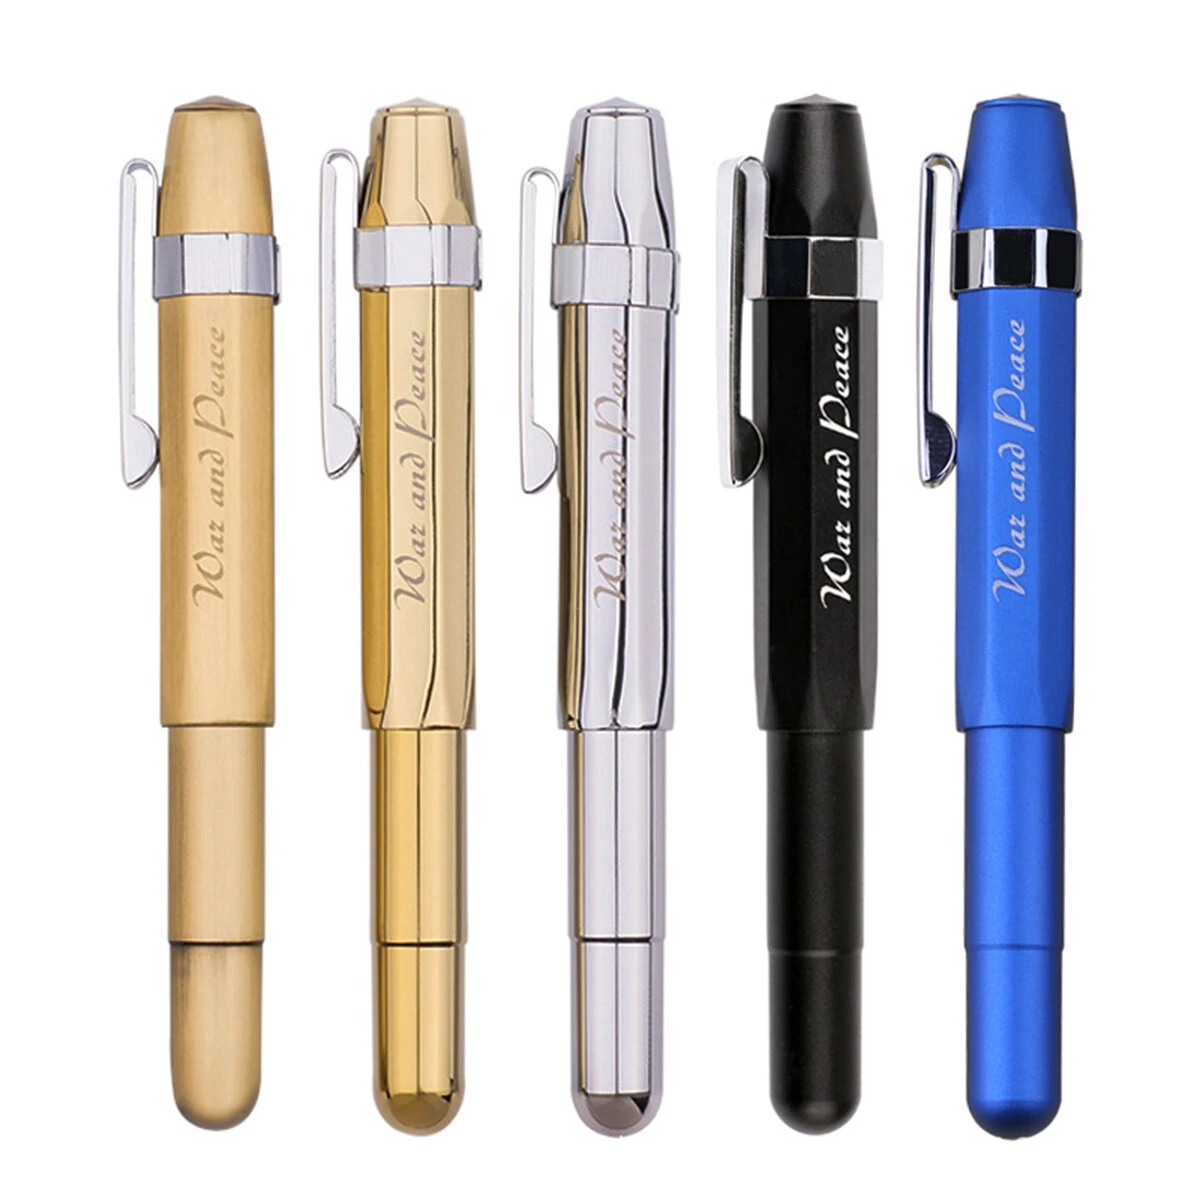 Metal fountain pen short smooth calligraphy writing pen ink gel pen with iron case gift for students friends families